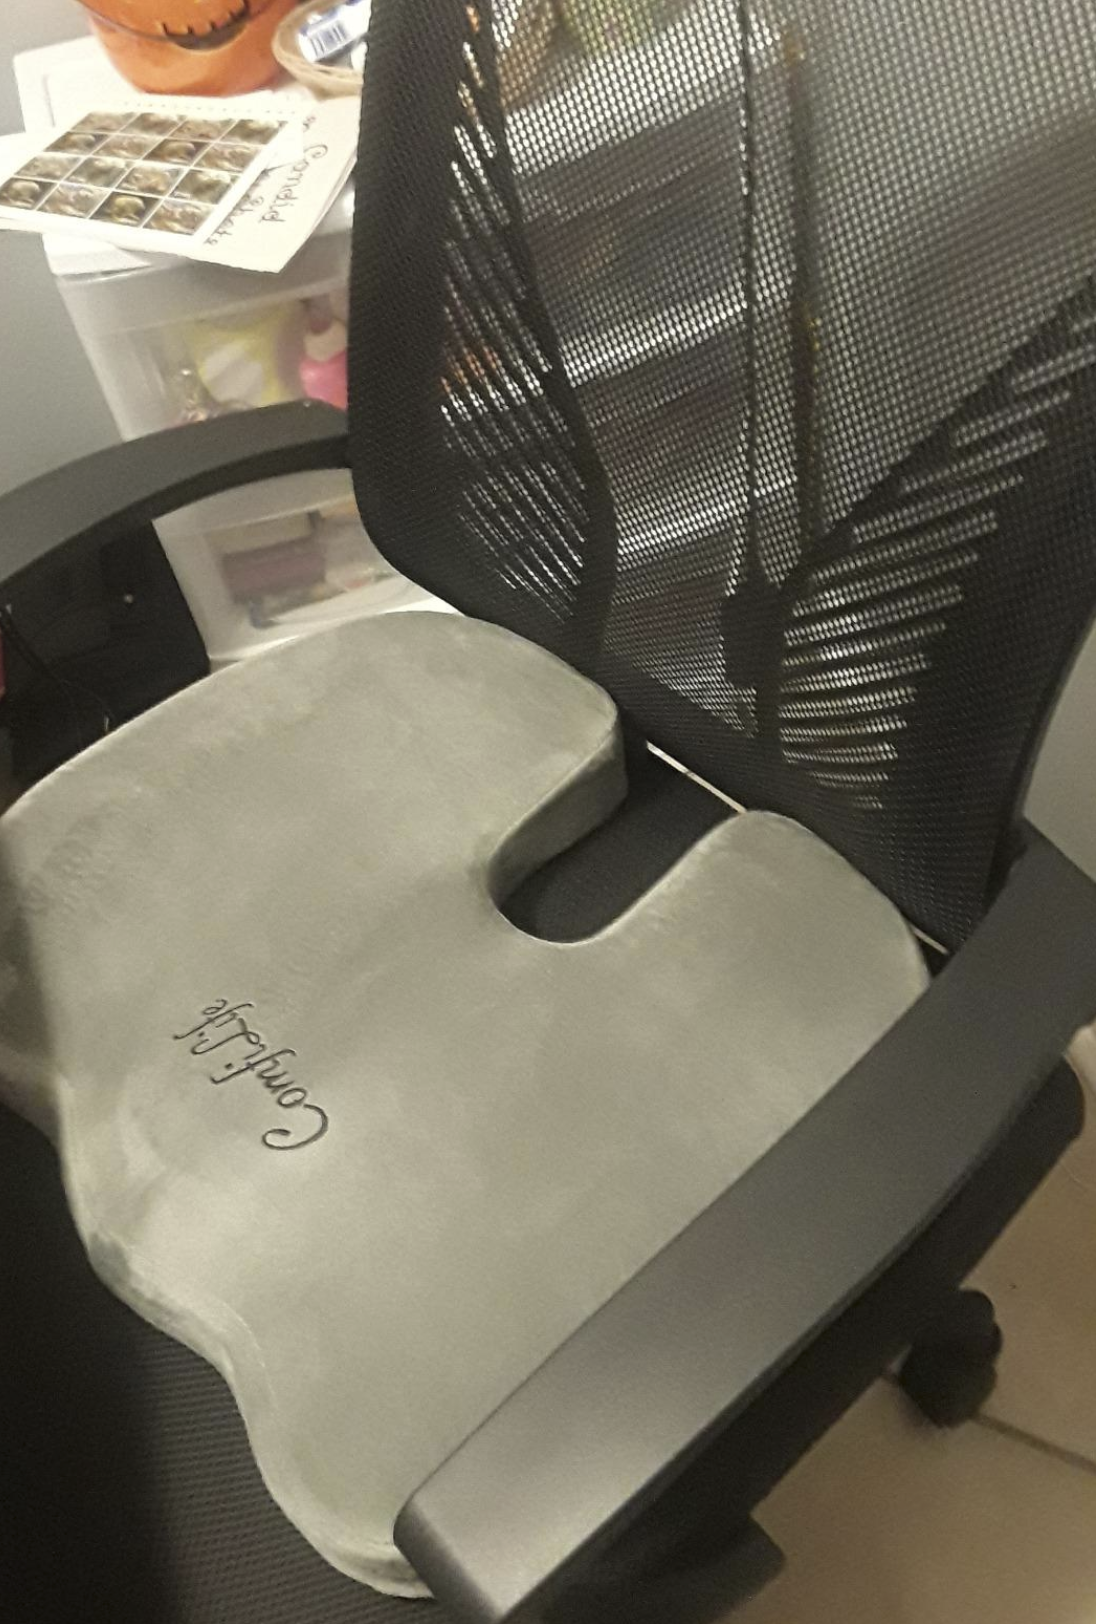 The gray cushion in an office chair. It has a slightly rectangular shape with rounded edges and an empty space near the tailbone to relieve pressure